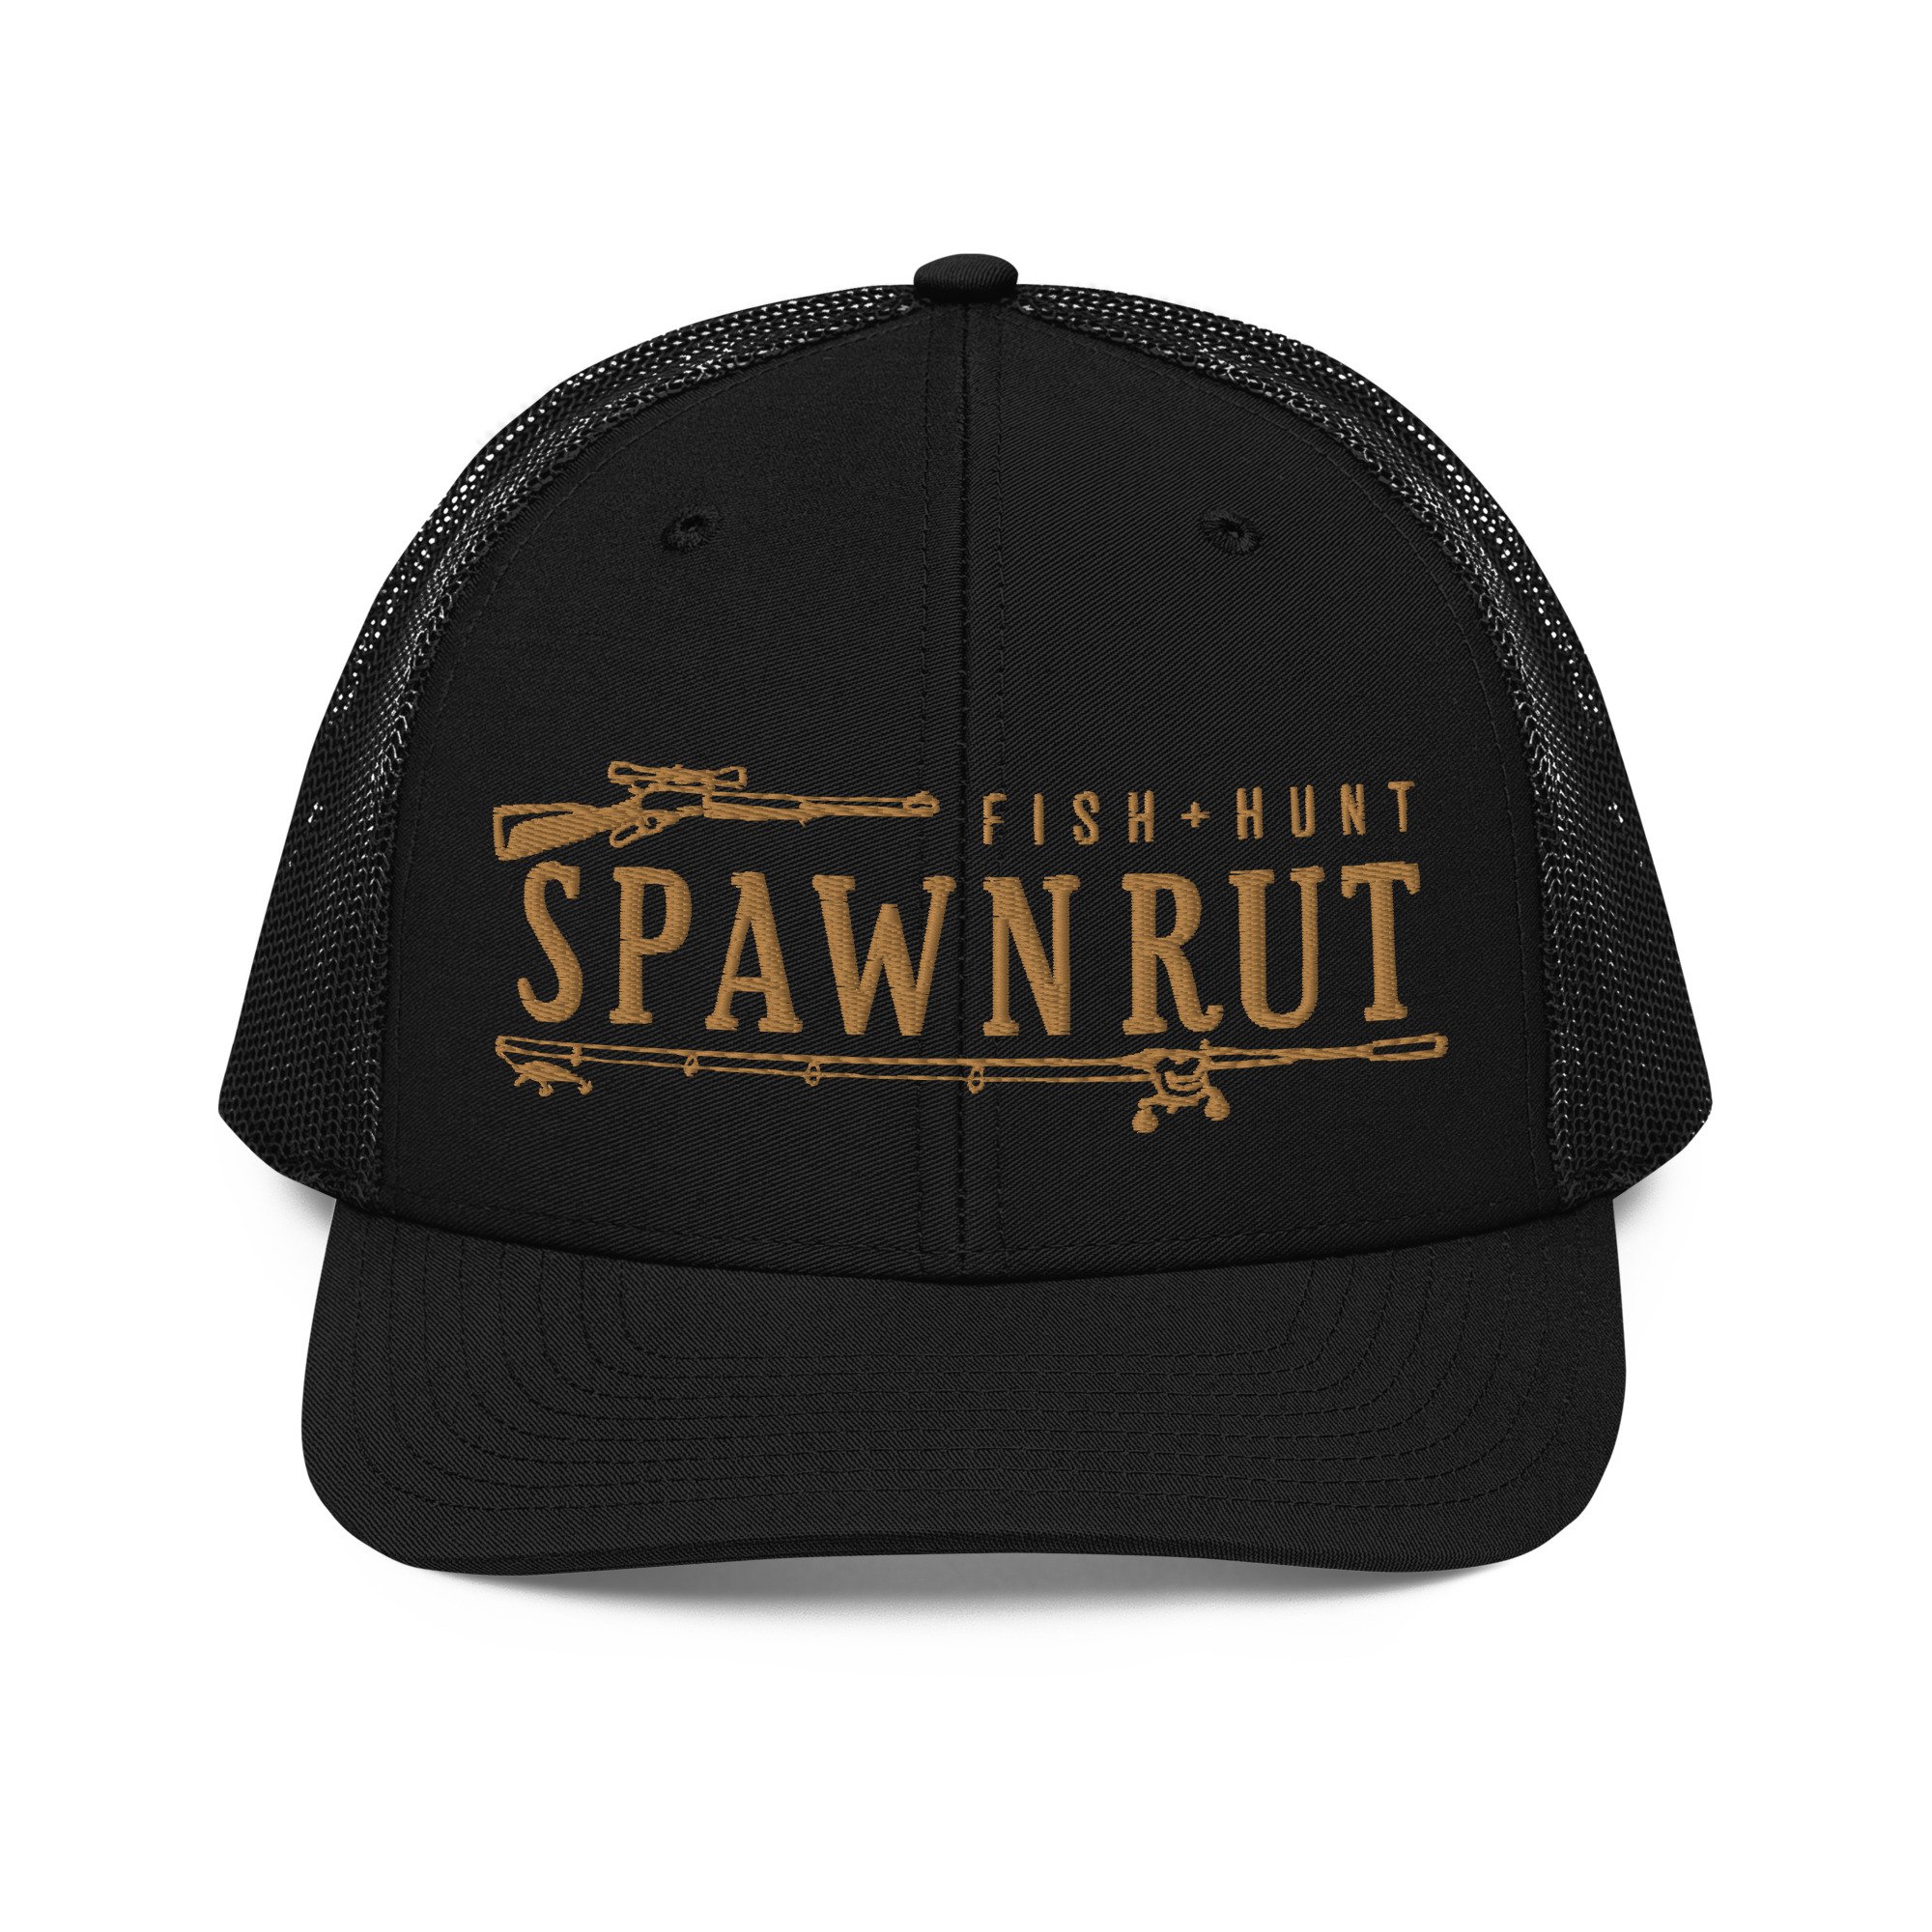 Outdoors Clothing Brand for Fishing, Hunting, Traveling & Hiking. Spawn Rut  Shop